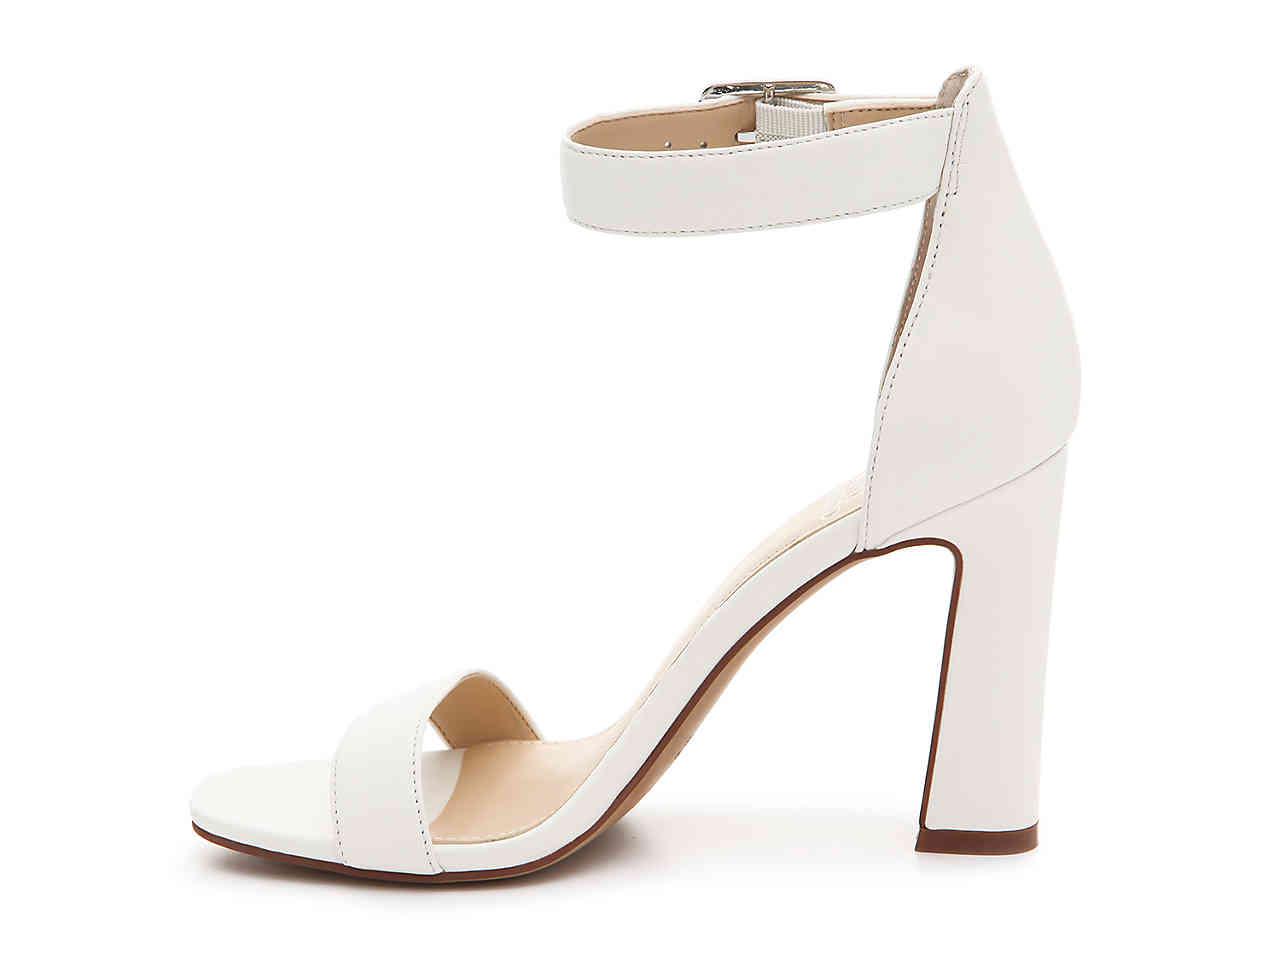 Vince Camuto Acelyn Sandal in White 